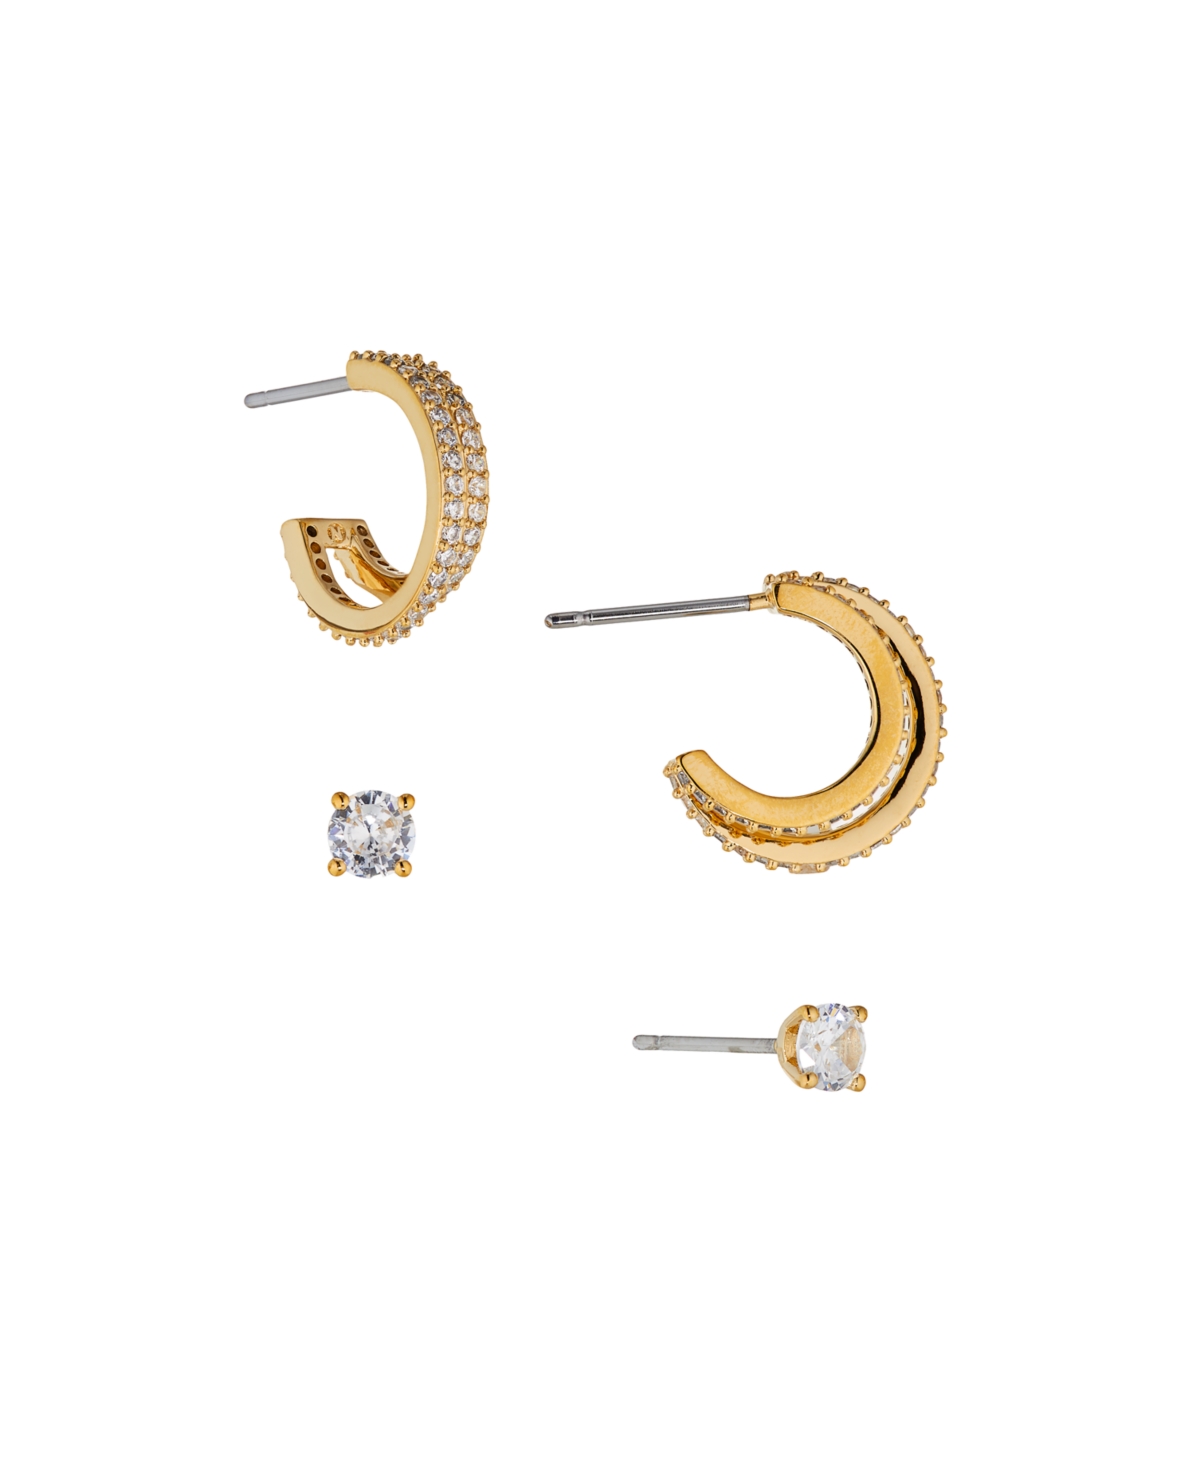 Ava Nadri Small Hoop And Stud Earring In Silver-tone Brass Set 4 Pieces In K Gold Plated